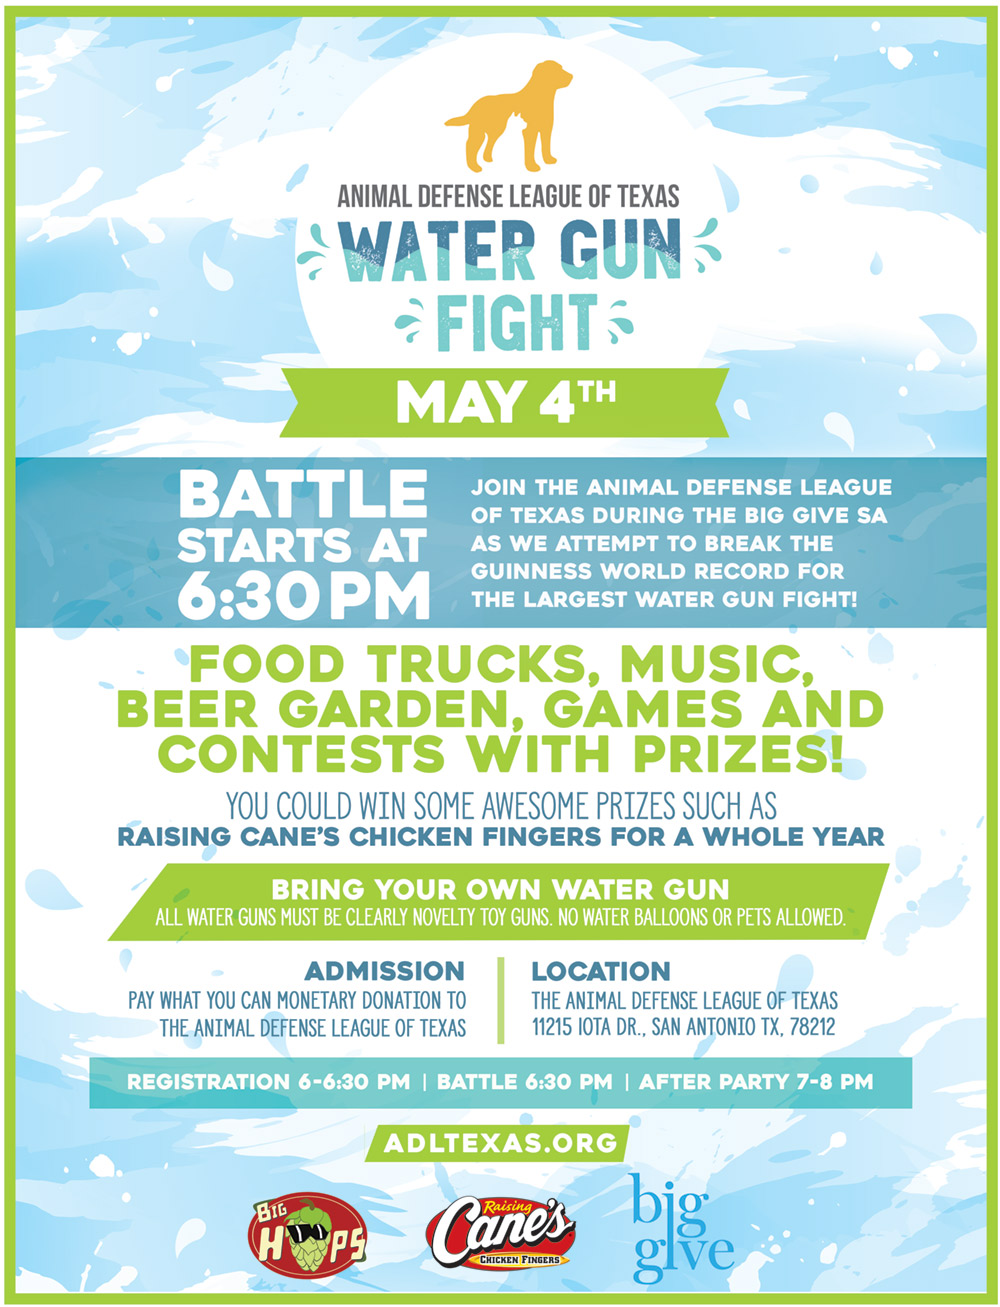 ADL's Water Gun Fight - May 4, 2017 | Battle starts at 6:30 pm